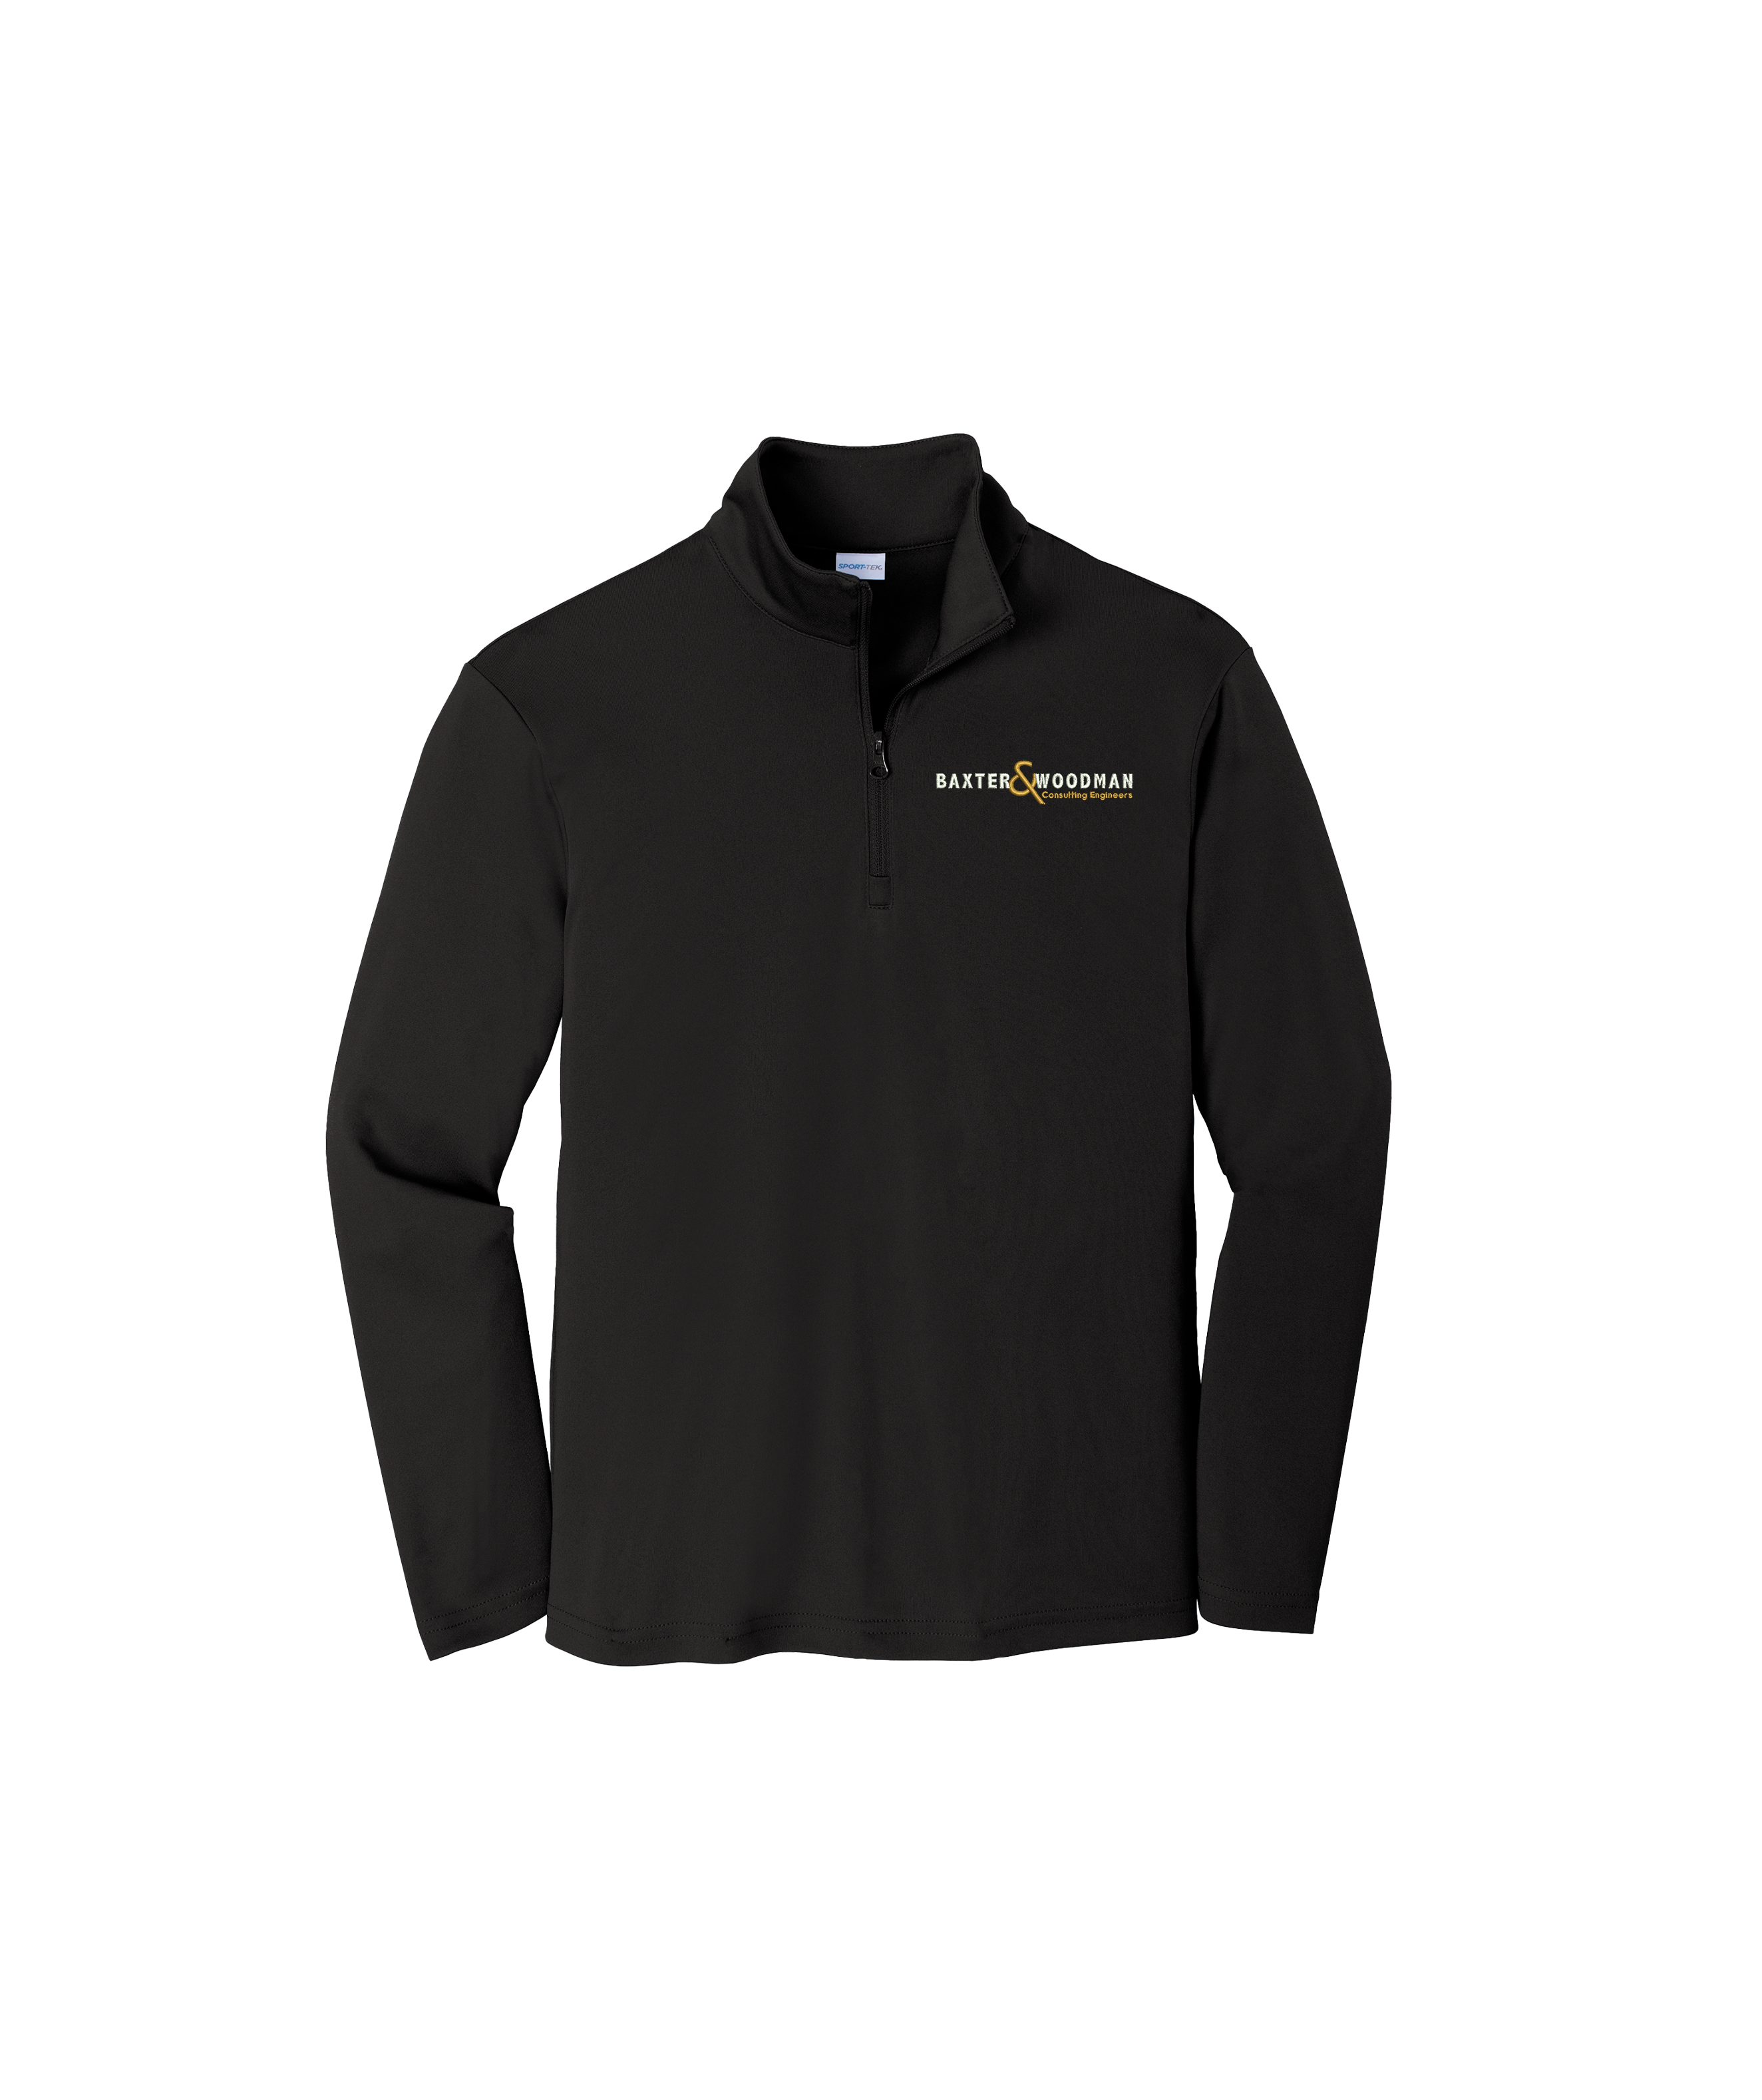 Sport-Tek Youth PosiCharge Competitor 1/4-Zip Pullover